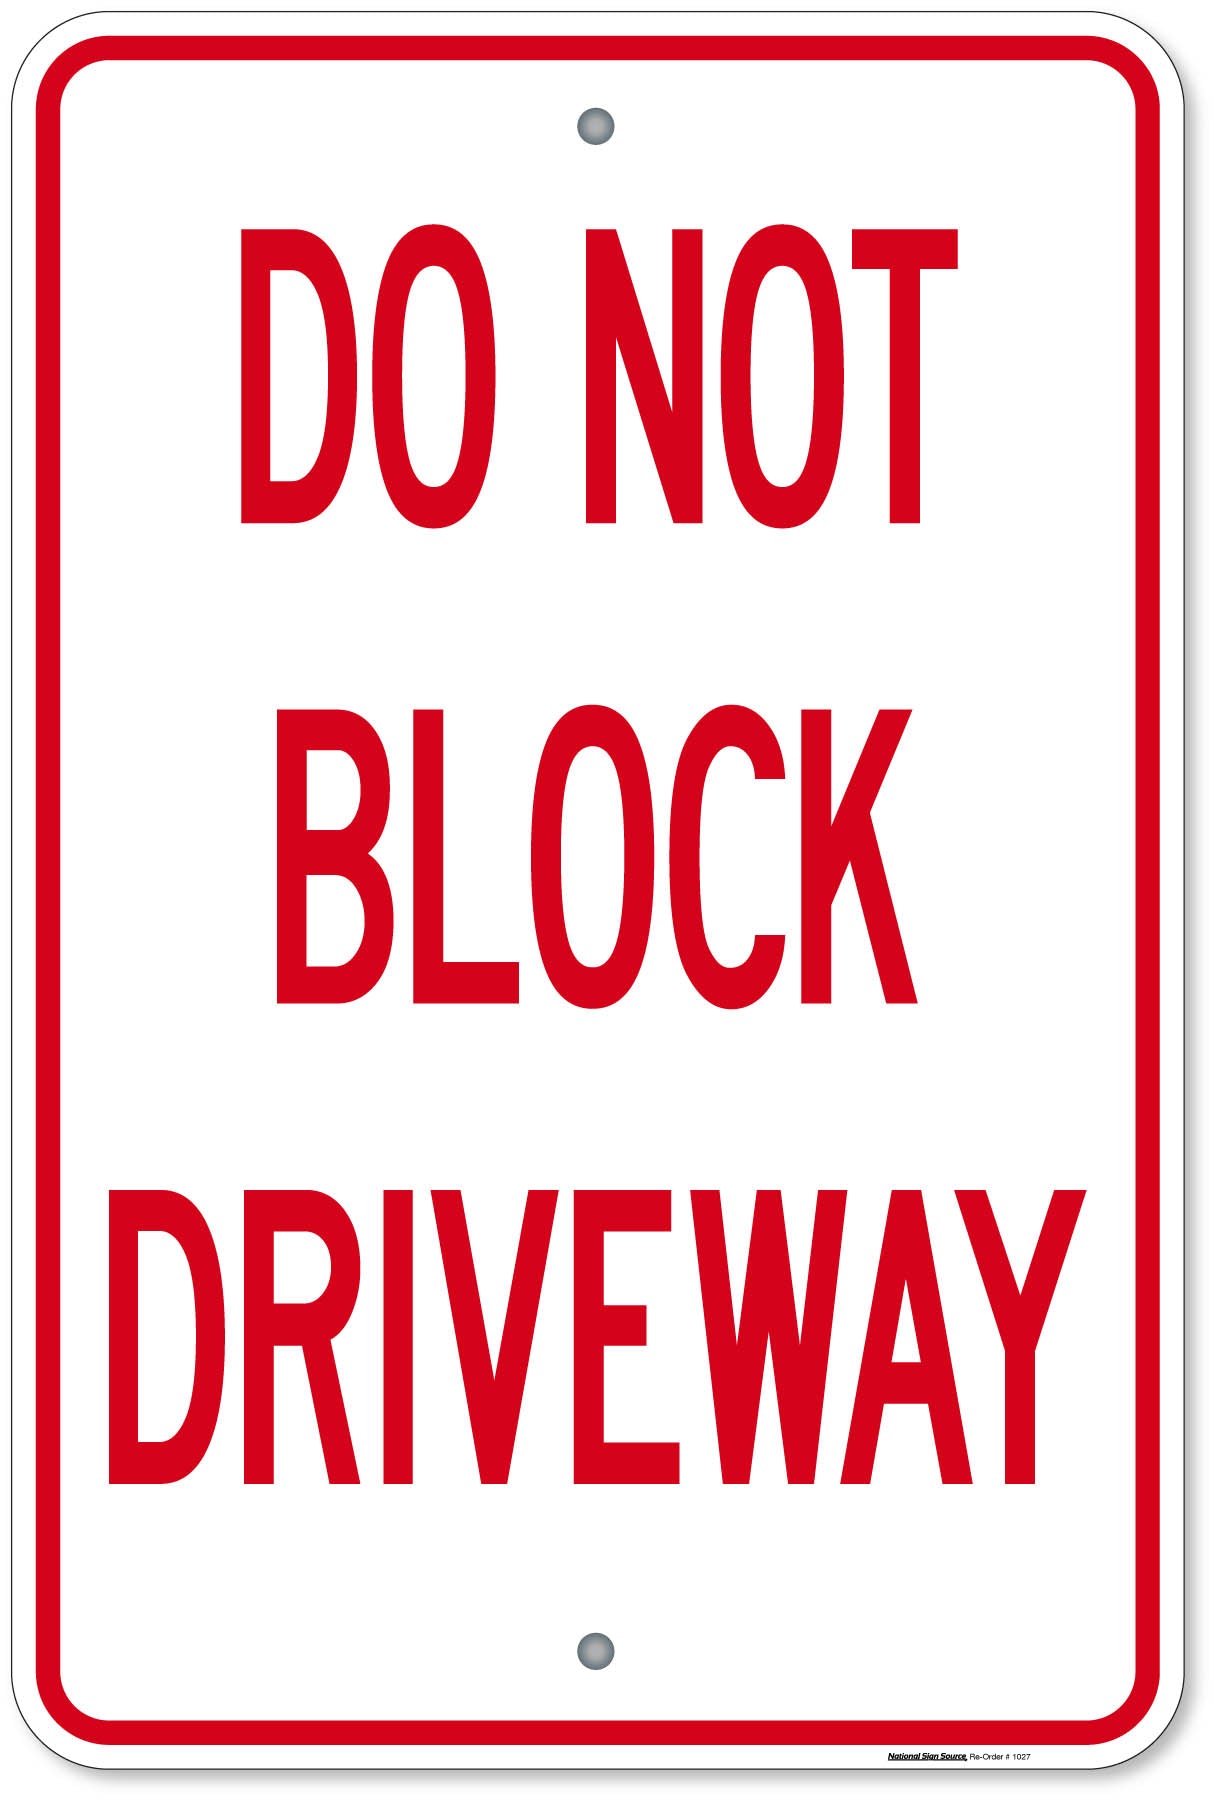 DO NOT BLOCK DRIVEWAY SIGNS.